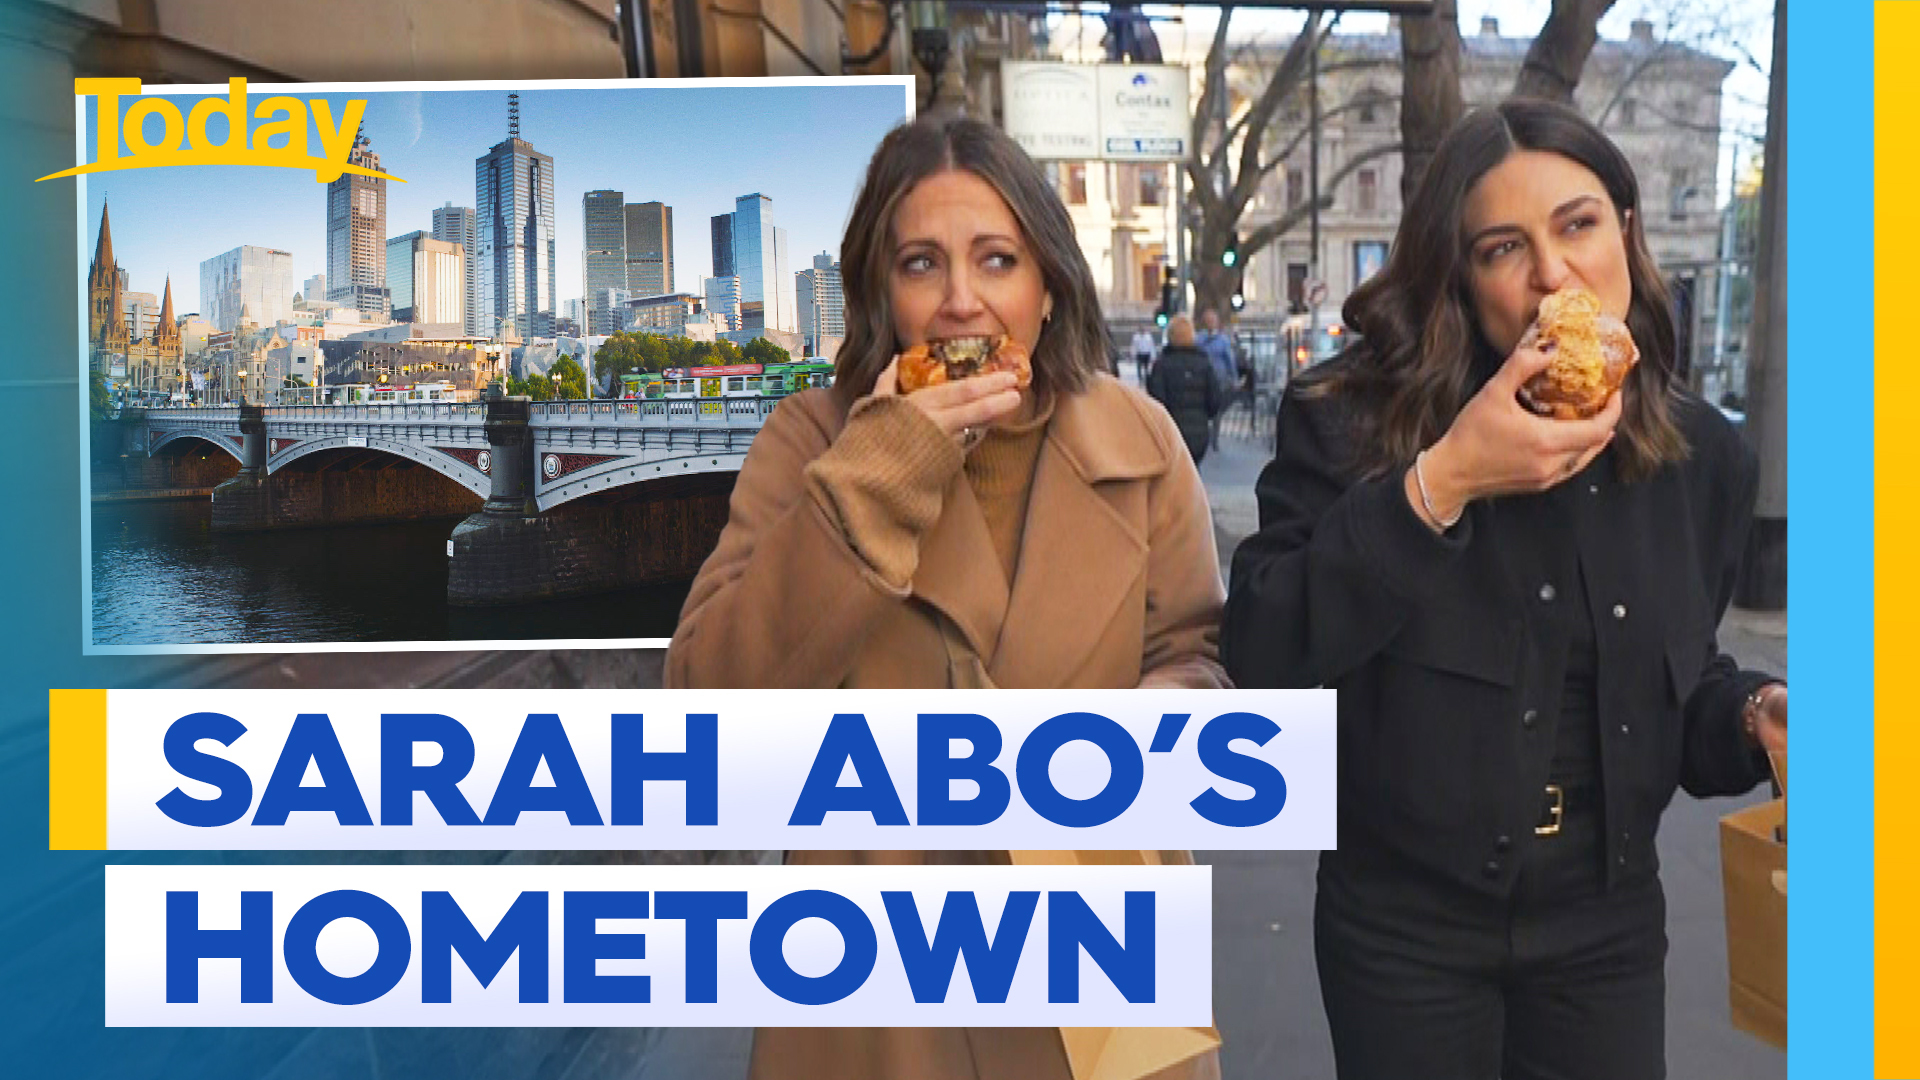 Sarah Abo shows viewers her hometown